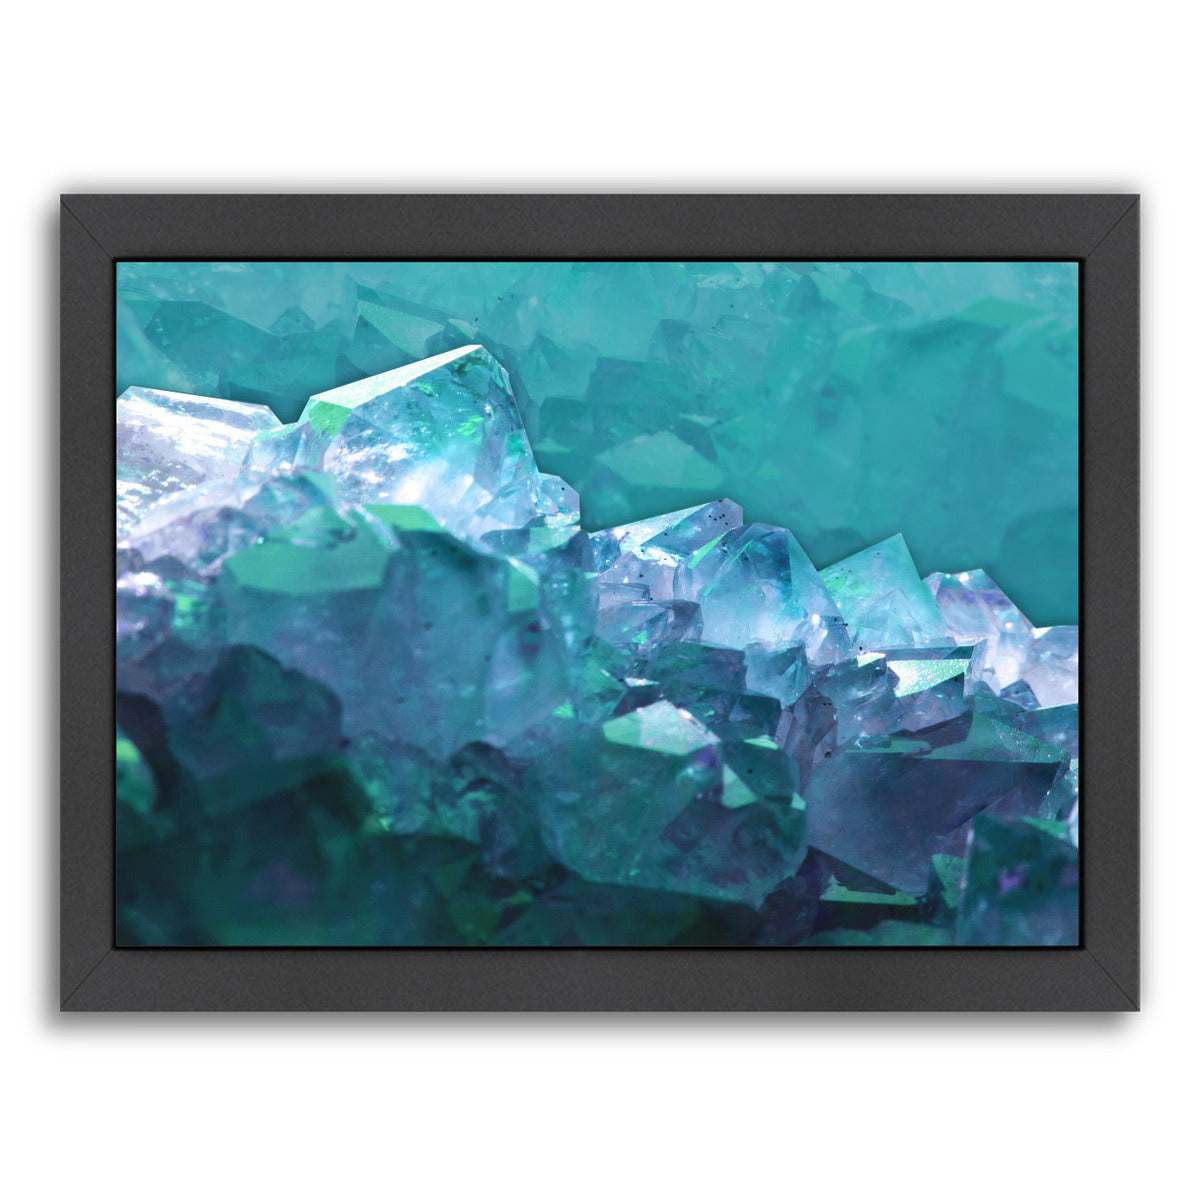 Water Crystals by Emanuela Carratoni Framed Print - Americanflat